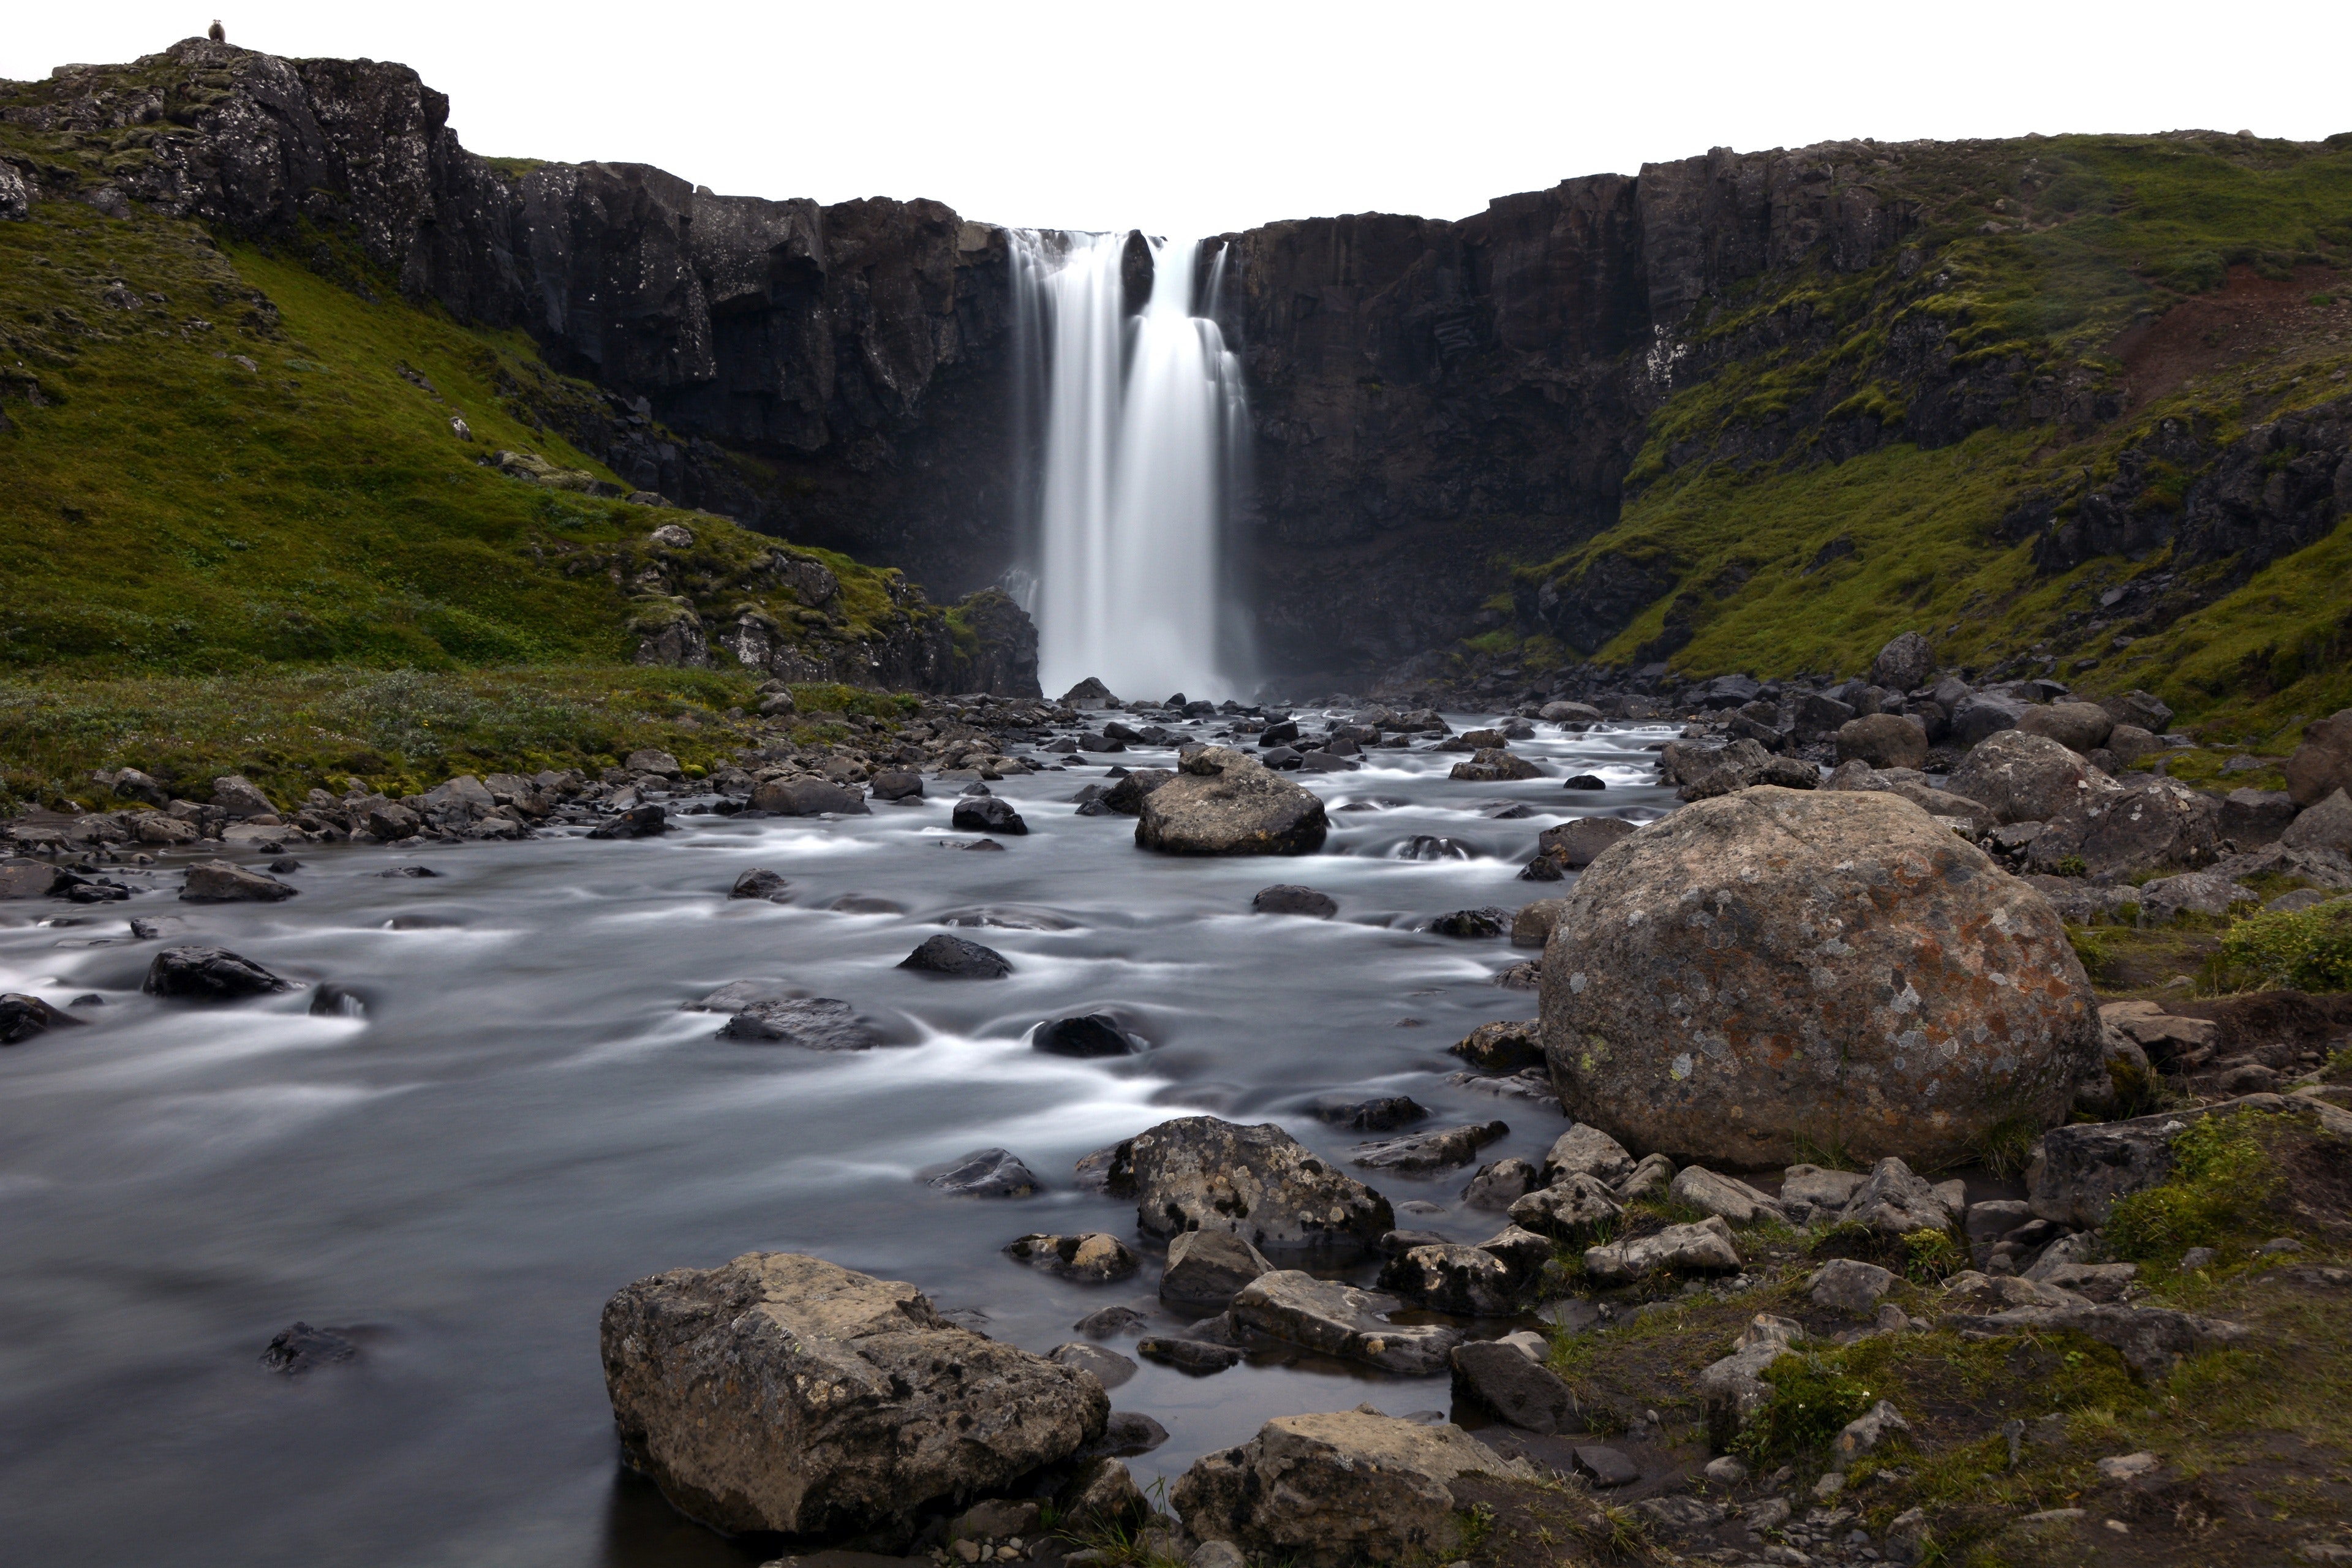 Timelapse Photography of Water Falls on Rock Cliff during Daytime, Iceland, Landscape, Moss, Nature, HQ Photo